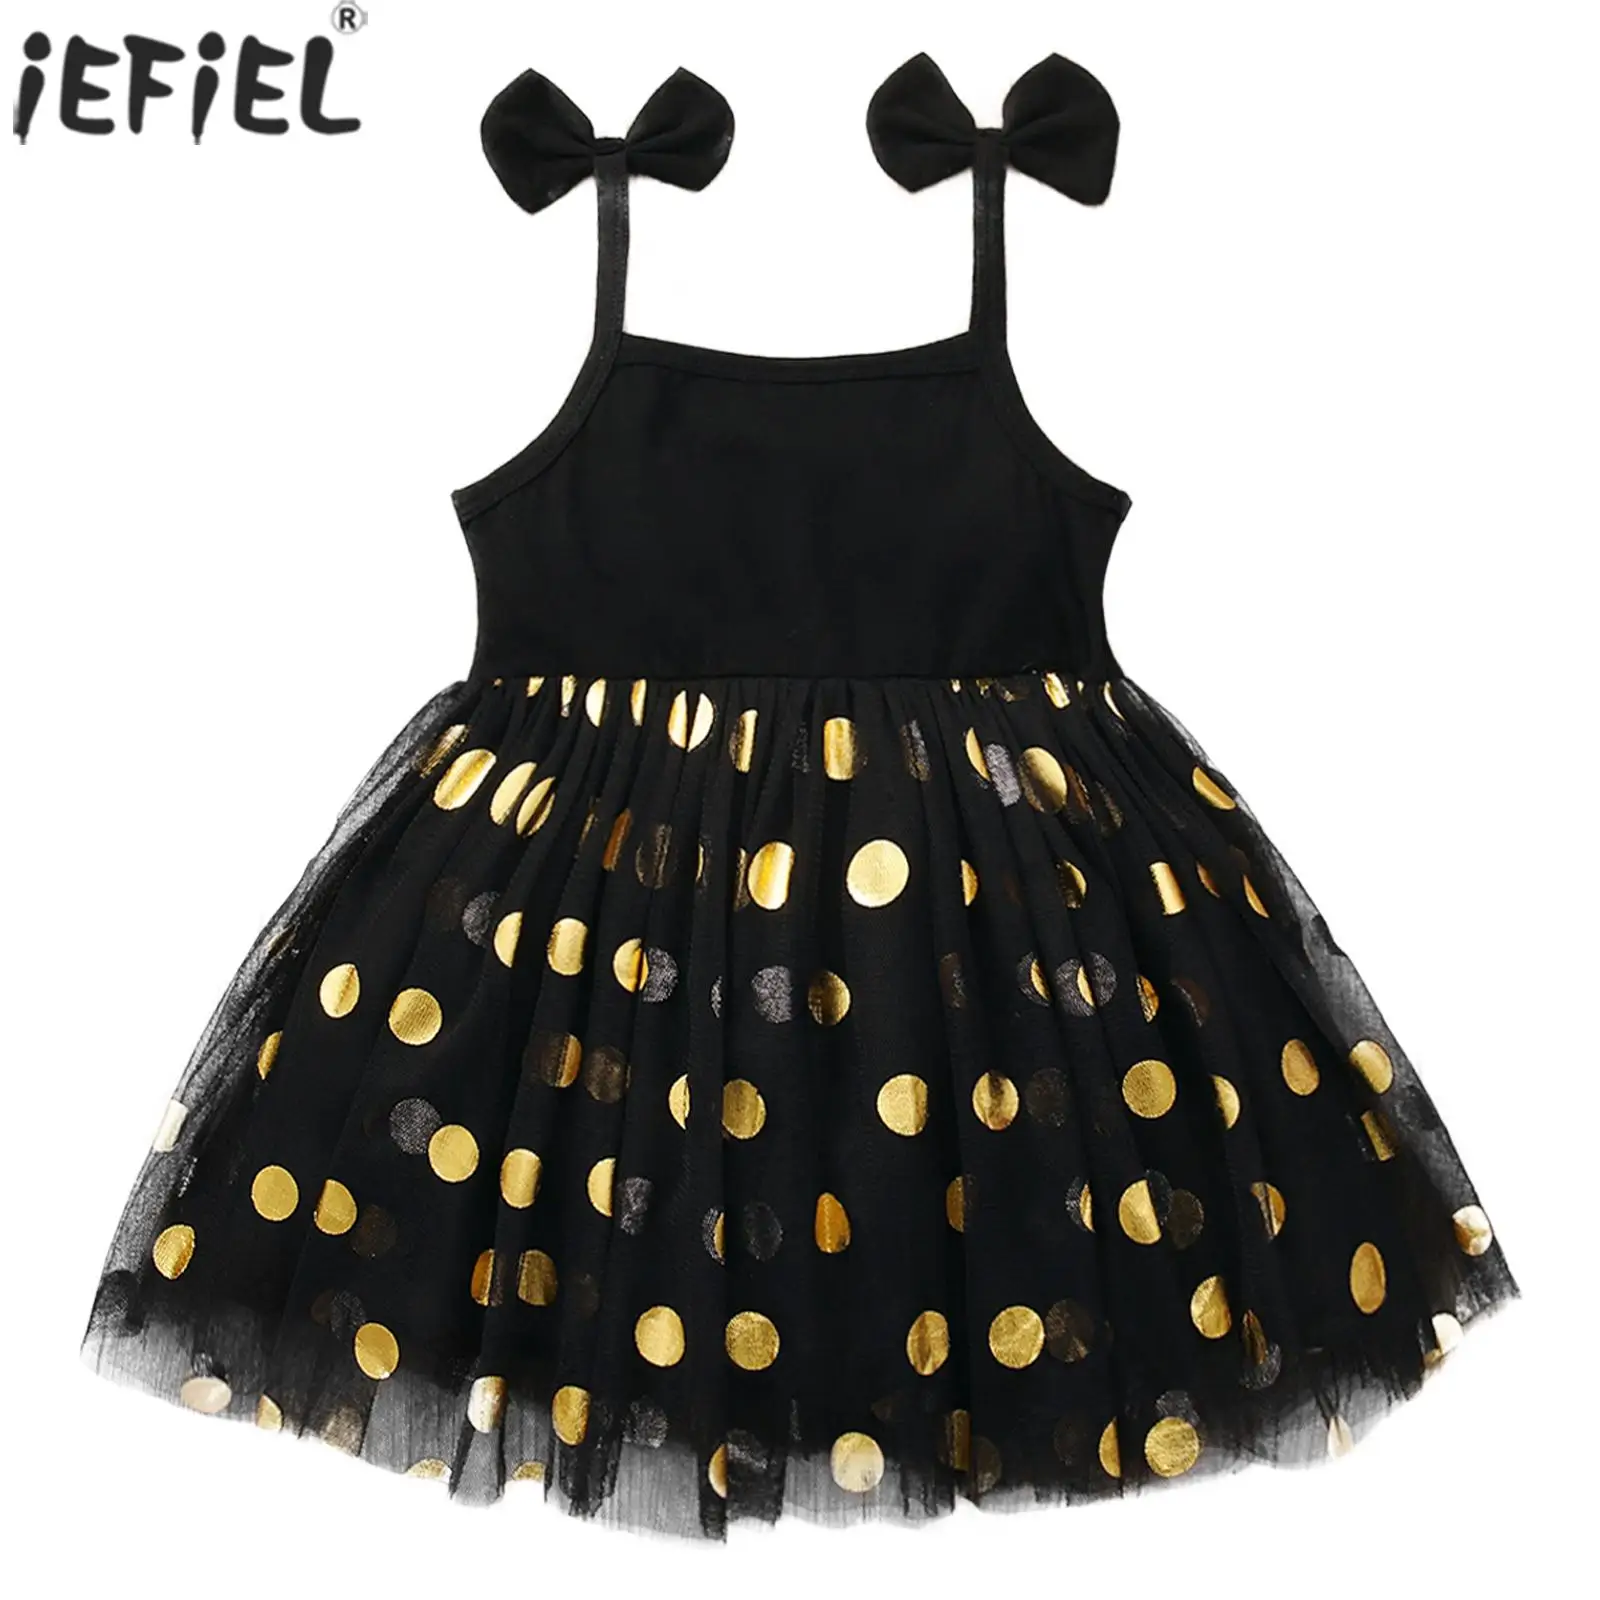 

Black Baby Girls Suspender Skirt Sleeveless Bowknot Decorated Shoulder Straps Polka Dots Mesh Dress for Kids Party Banquet Wear